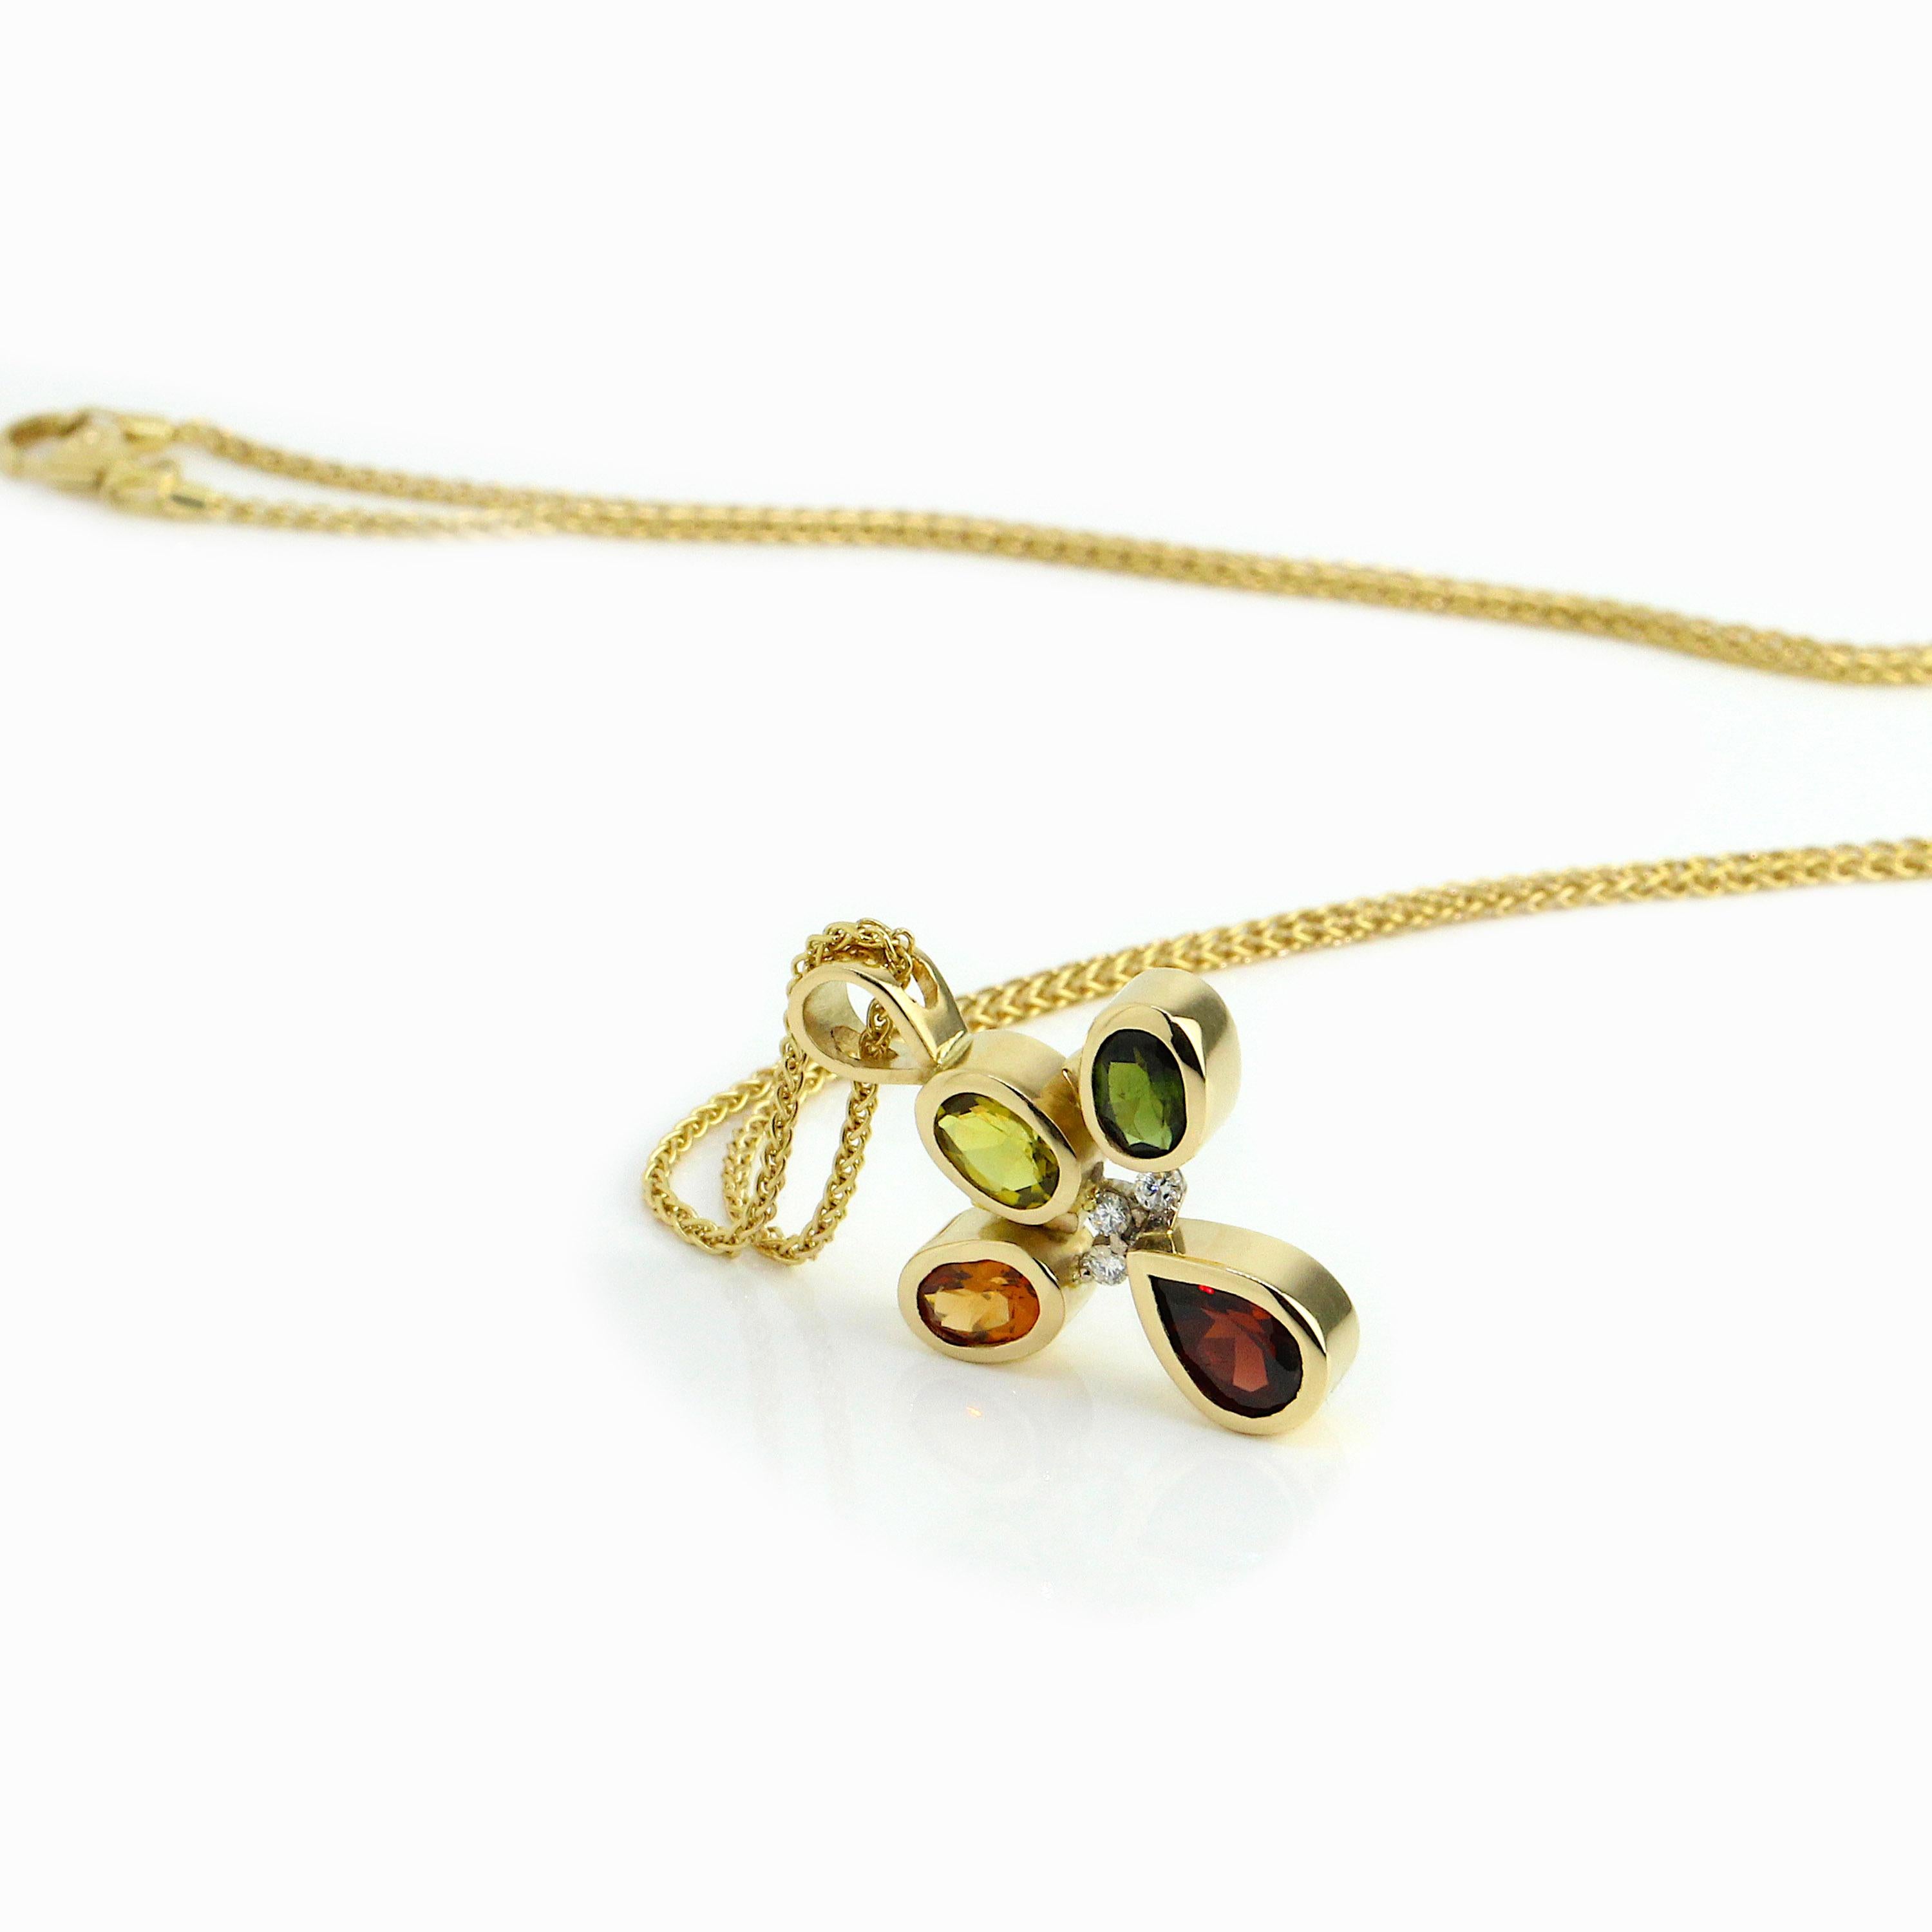 An exquisite one of a kind 18k yellow gold pendant set with a beautiful selection of complimentary gems, yellow sapphire, orange and red garnet, green tourmaline and white diamonds. An exquisite eye-catching feminine flowing geometric 18k yellow